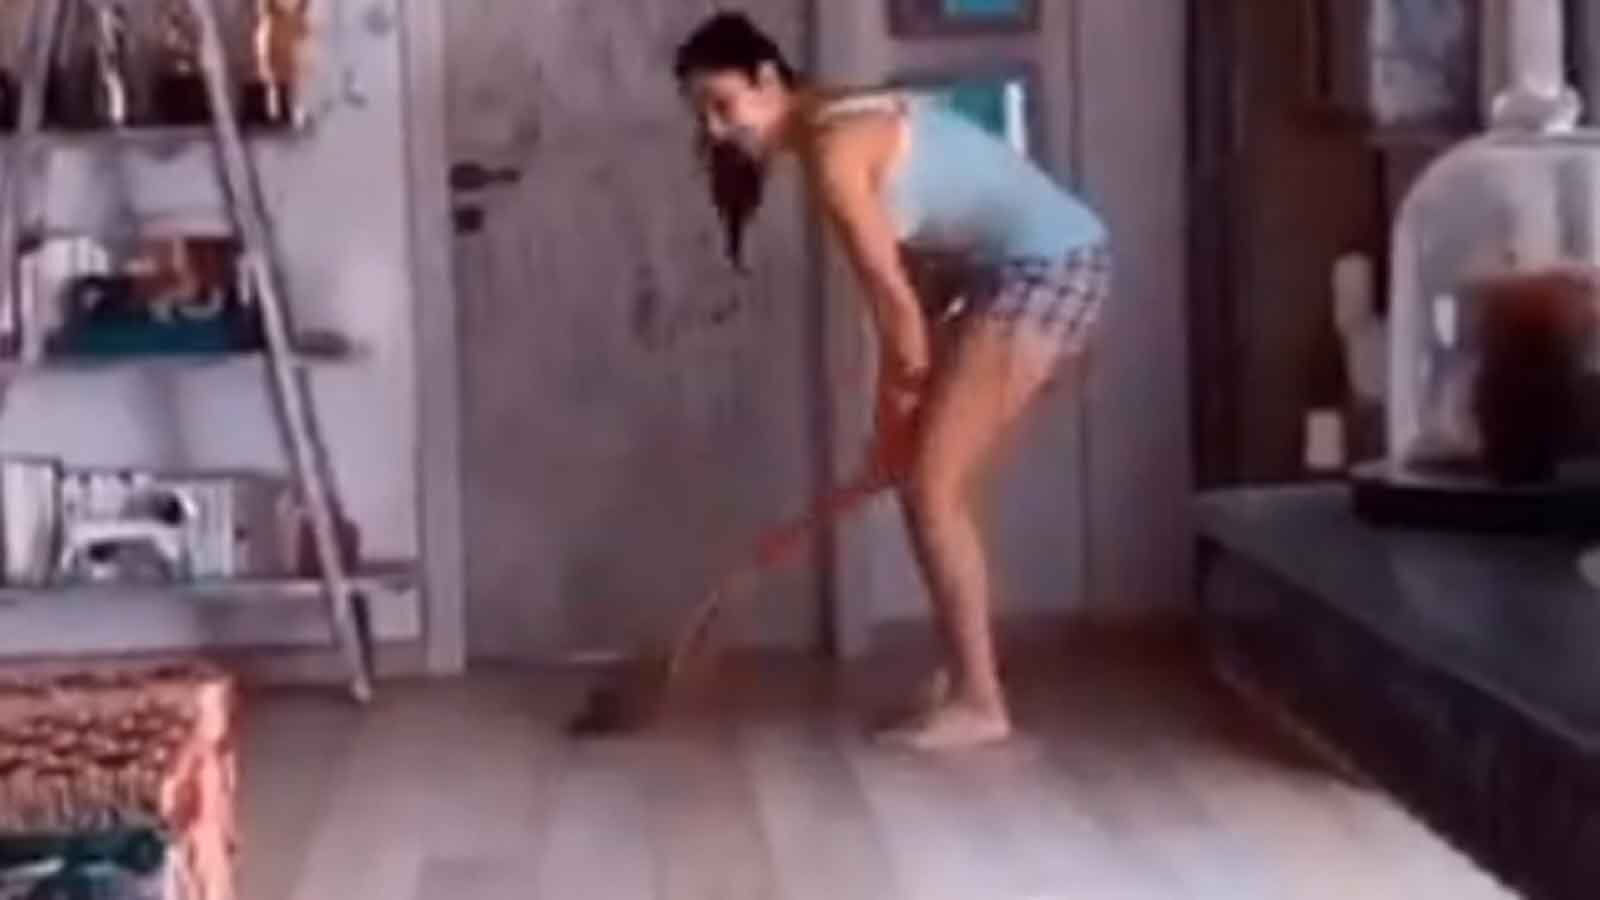 Video of Katrina Kaif using broom goes viral again before her marriage with Vicky Kaushal